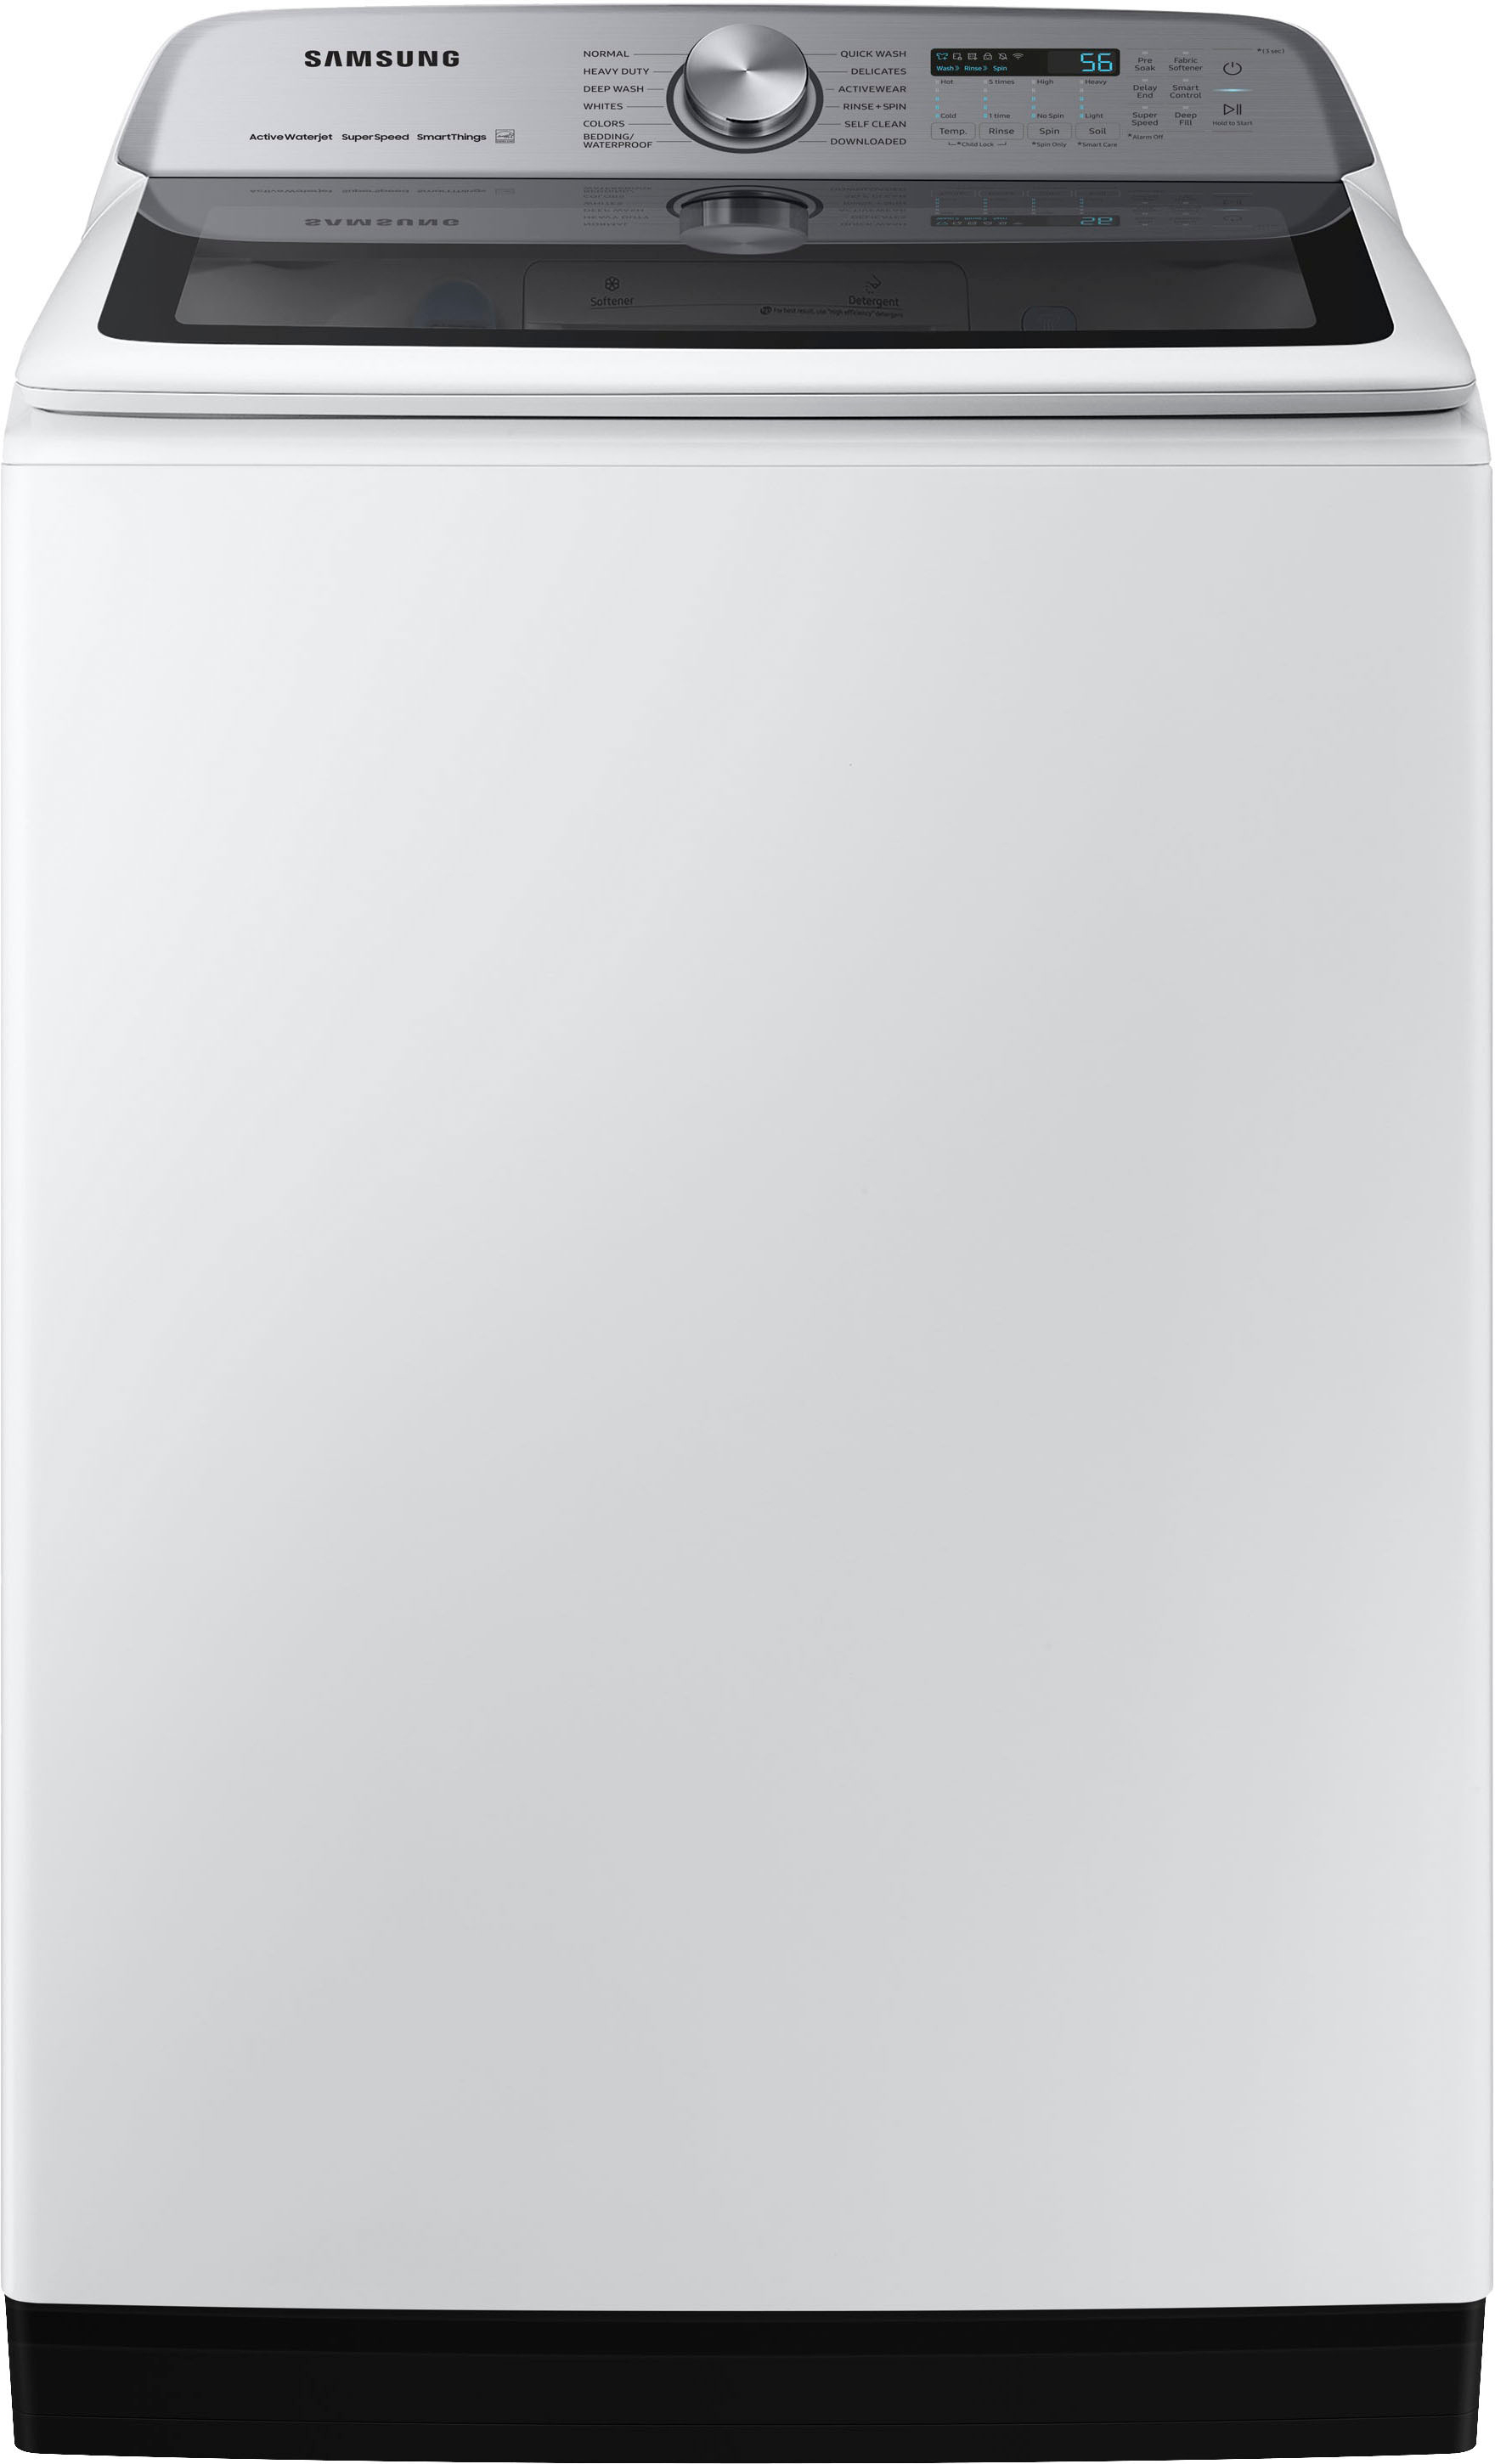 Samsung 5.2 Cu. Ft. High-Efficiency Smart Top Load Washer with Super Speed  Wash White WA52A5500AW/US - Best Buy